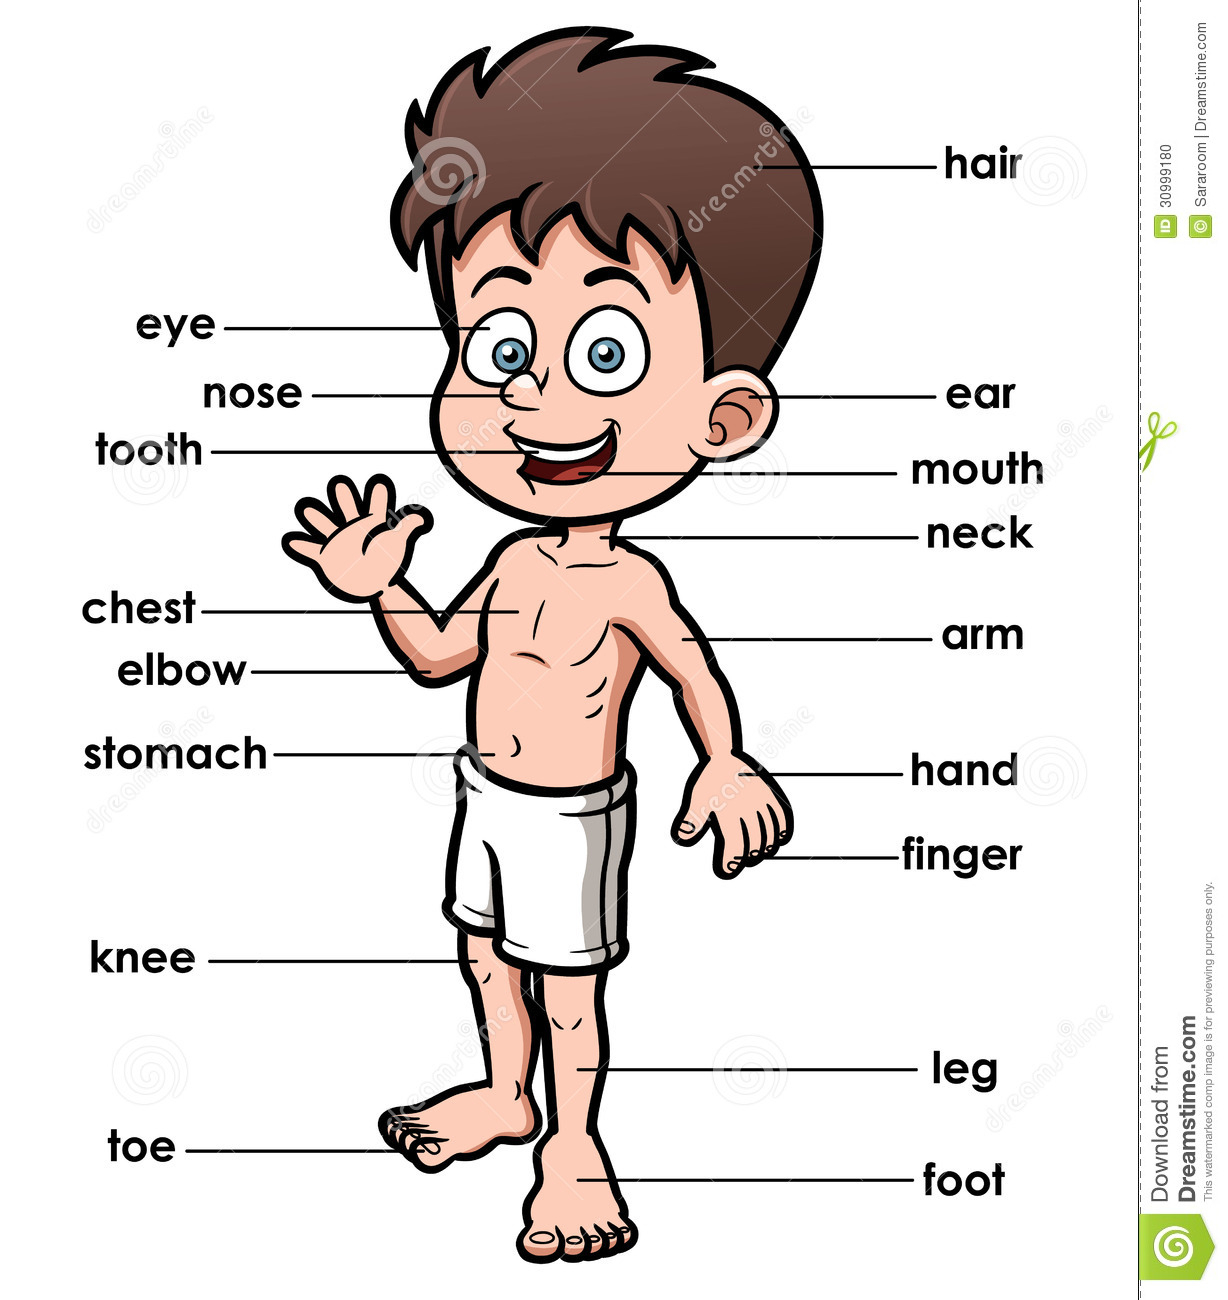  collection of parts. Body clipart preschool